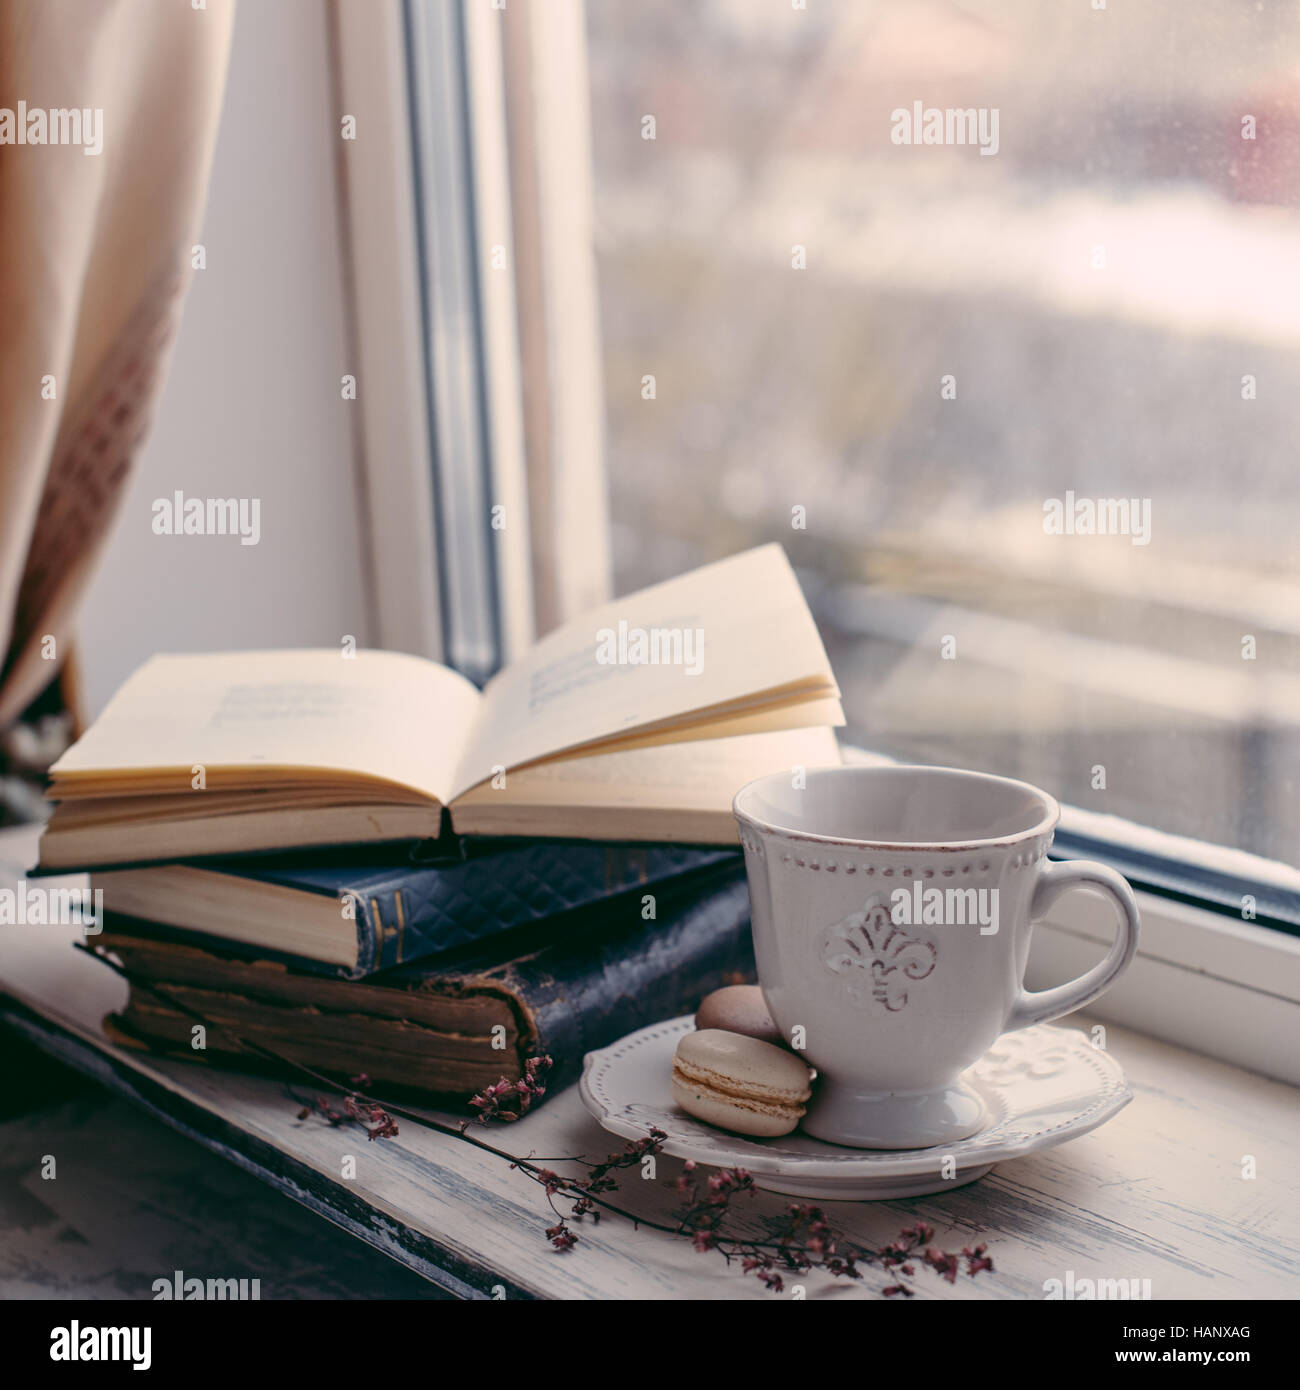 https://c8.alamy.com/comp/HANXAG/cozy-winter-still-life-cup-of-hot-coffee-and-opened-book-on-vintage-HANXAG.jpg